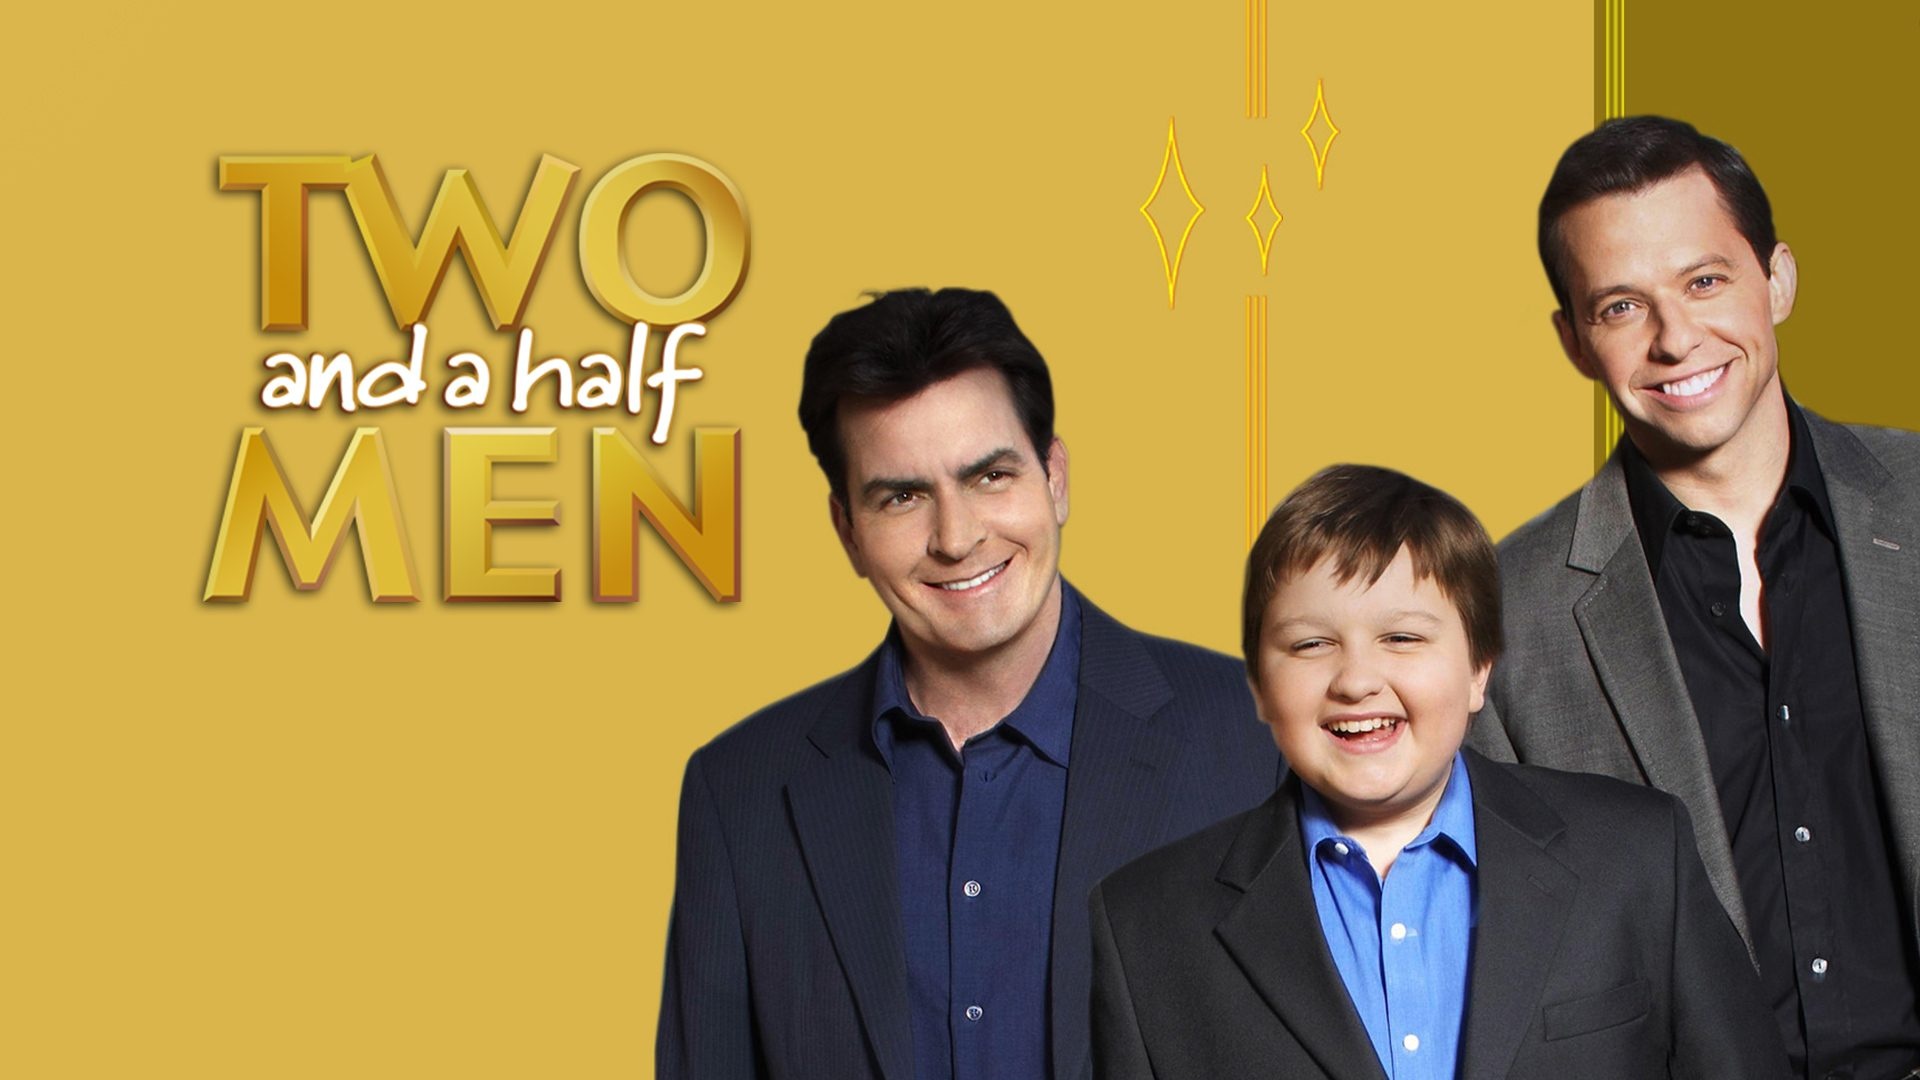 Two and a Half Men, Laugh-out-loud moments, Loveable characters, Brotherly camaraderie, 1920x1080 Full HD Desktop